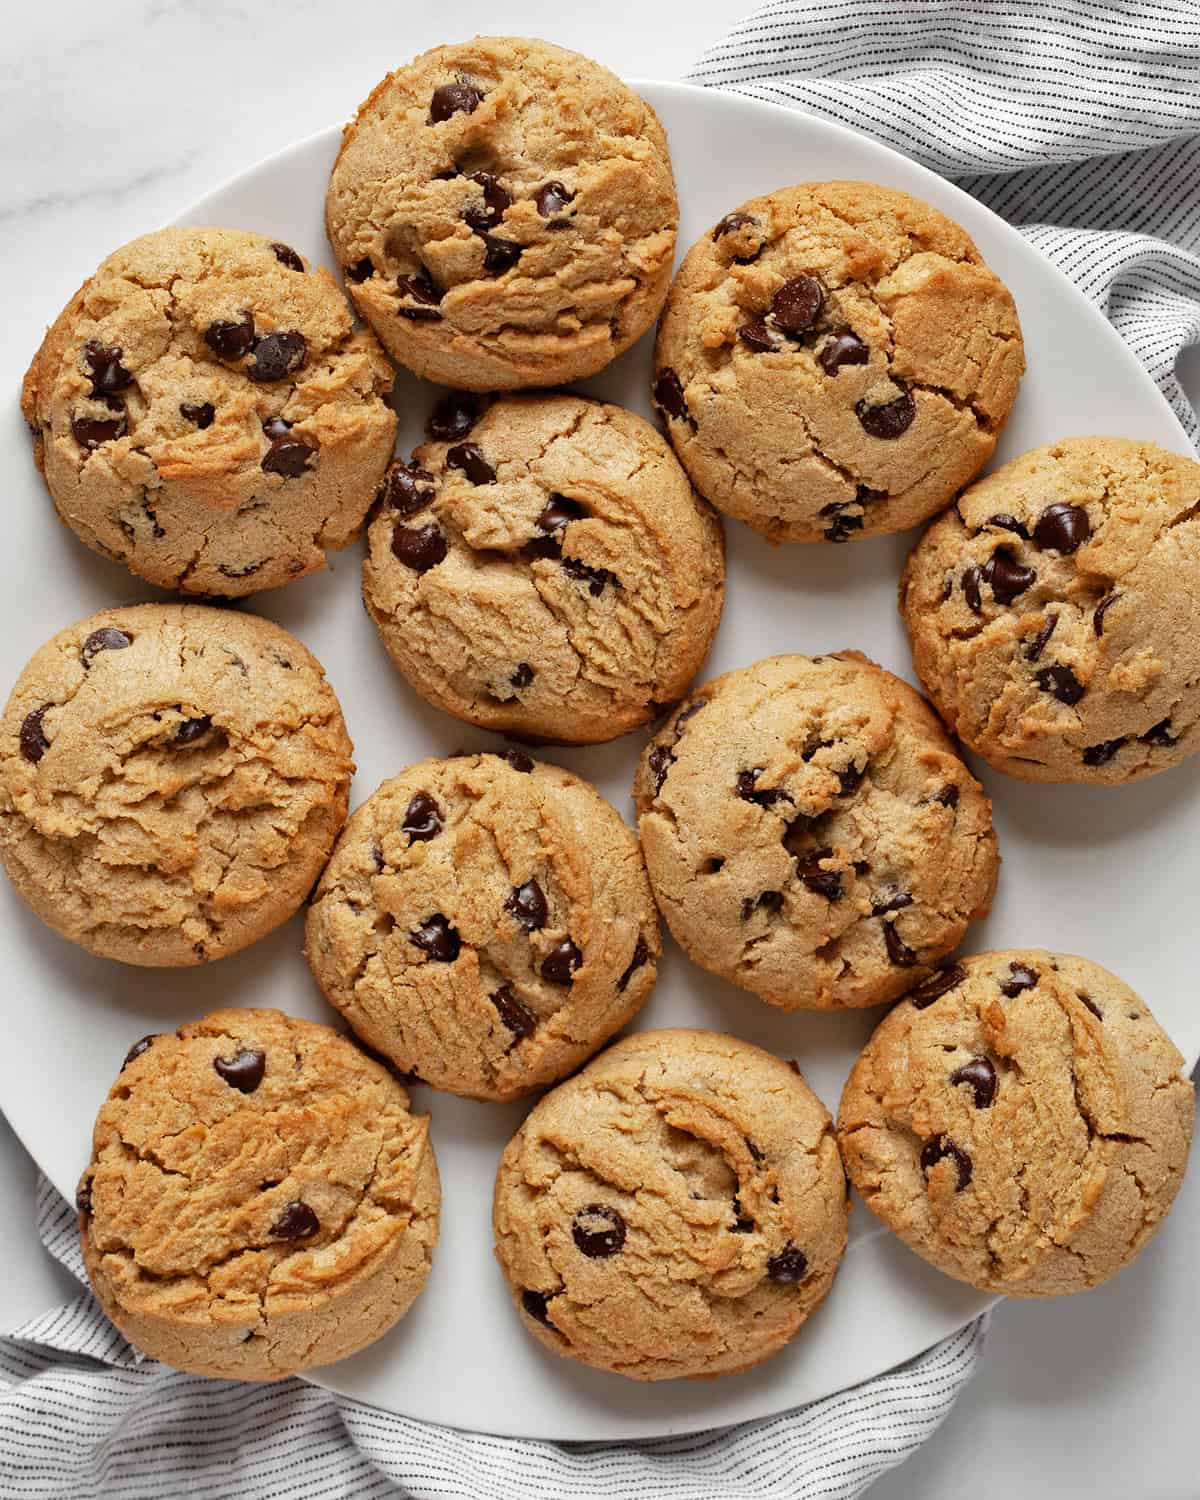 A large plate with peanut butter chocolate chips cookies.